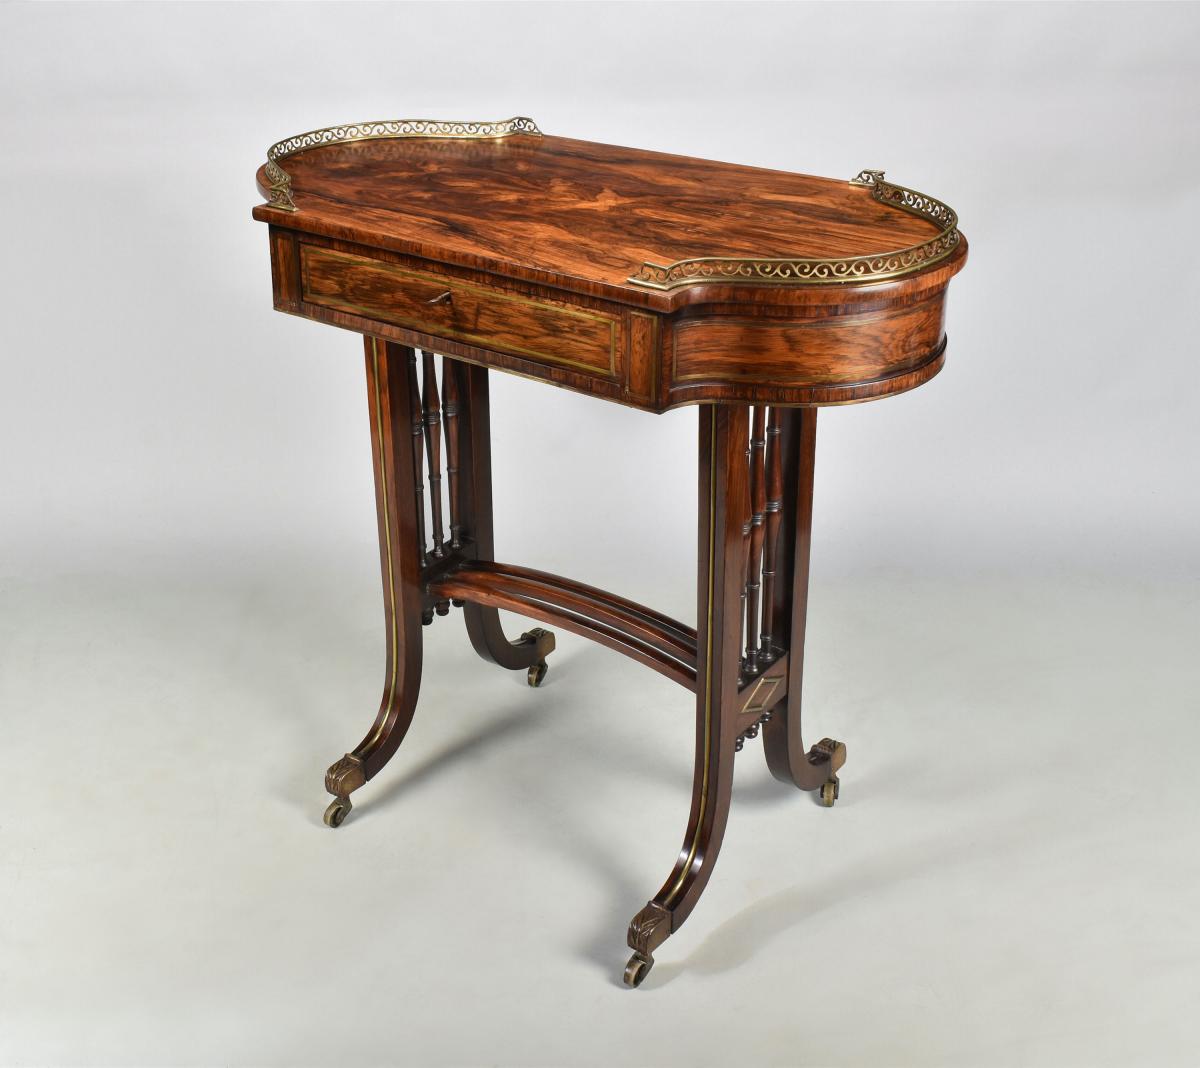 A fine Regency brass inlaid rosewood occasional table, almost certainly by Gillow, c.1810